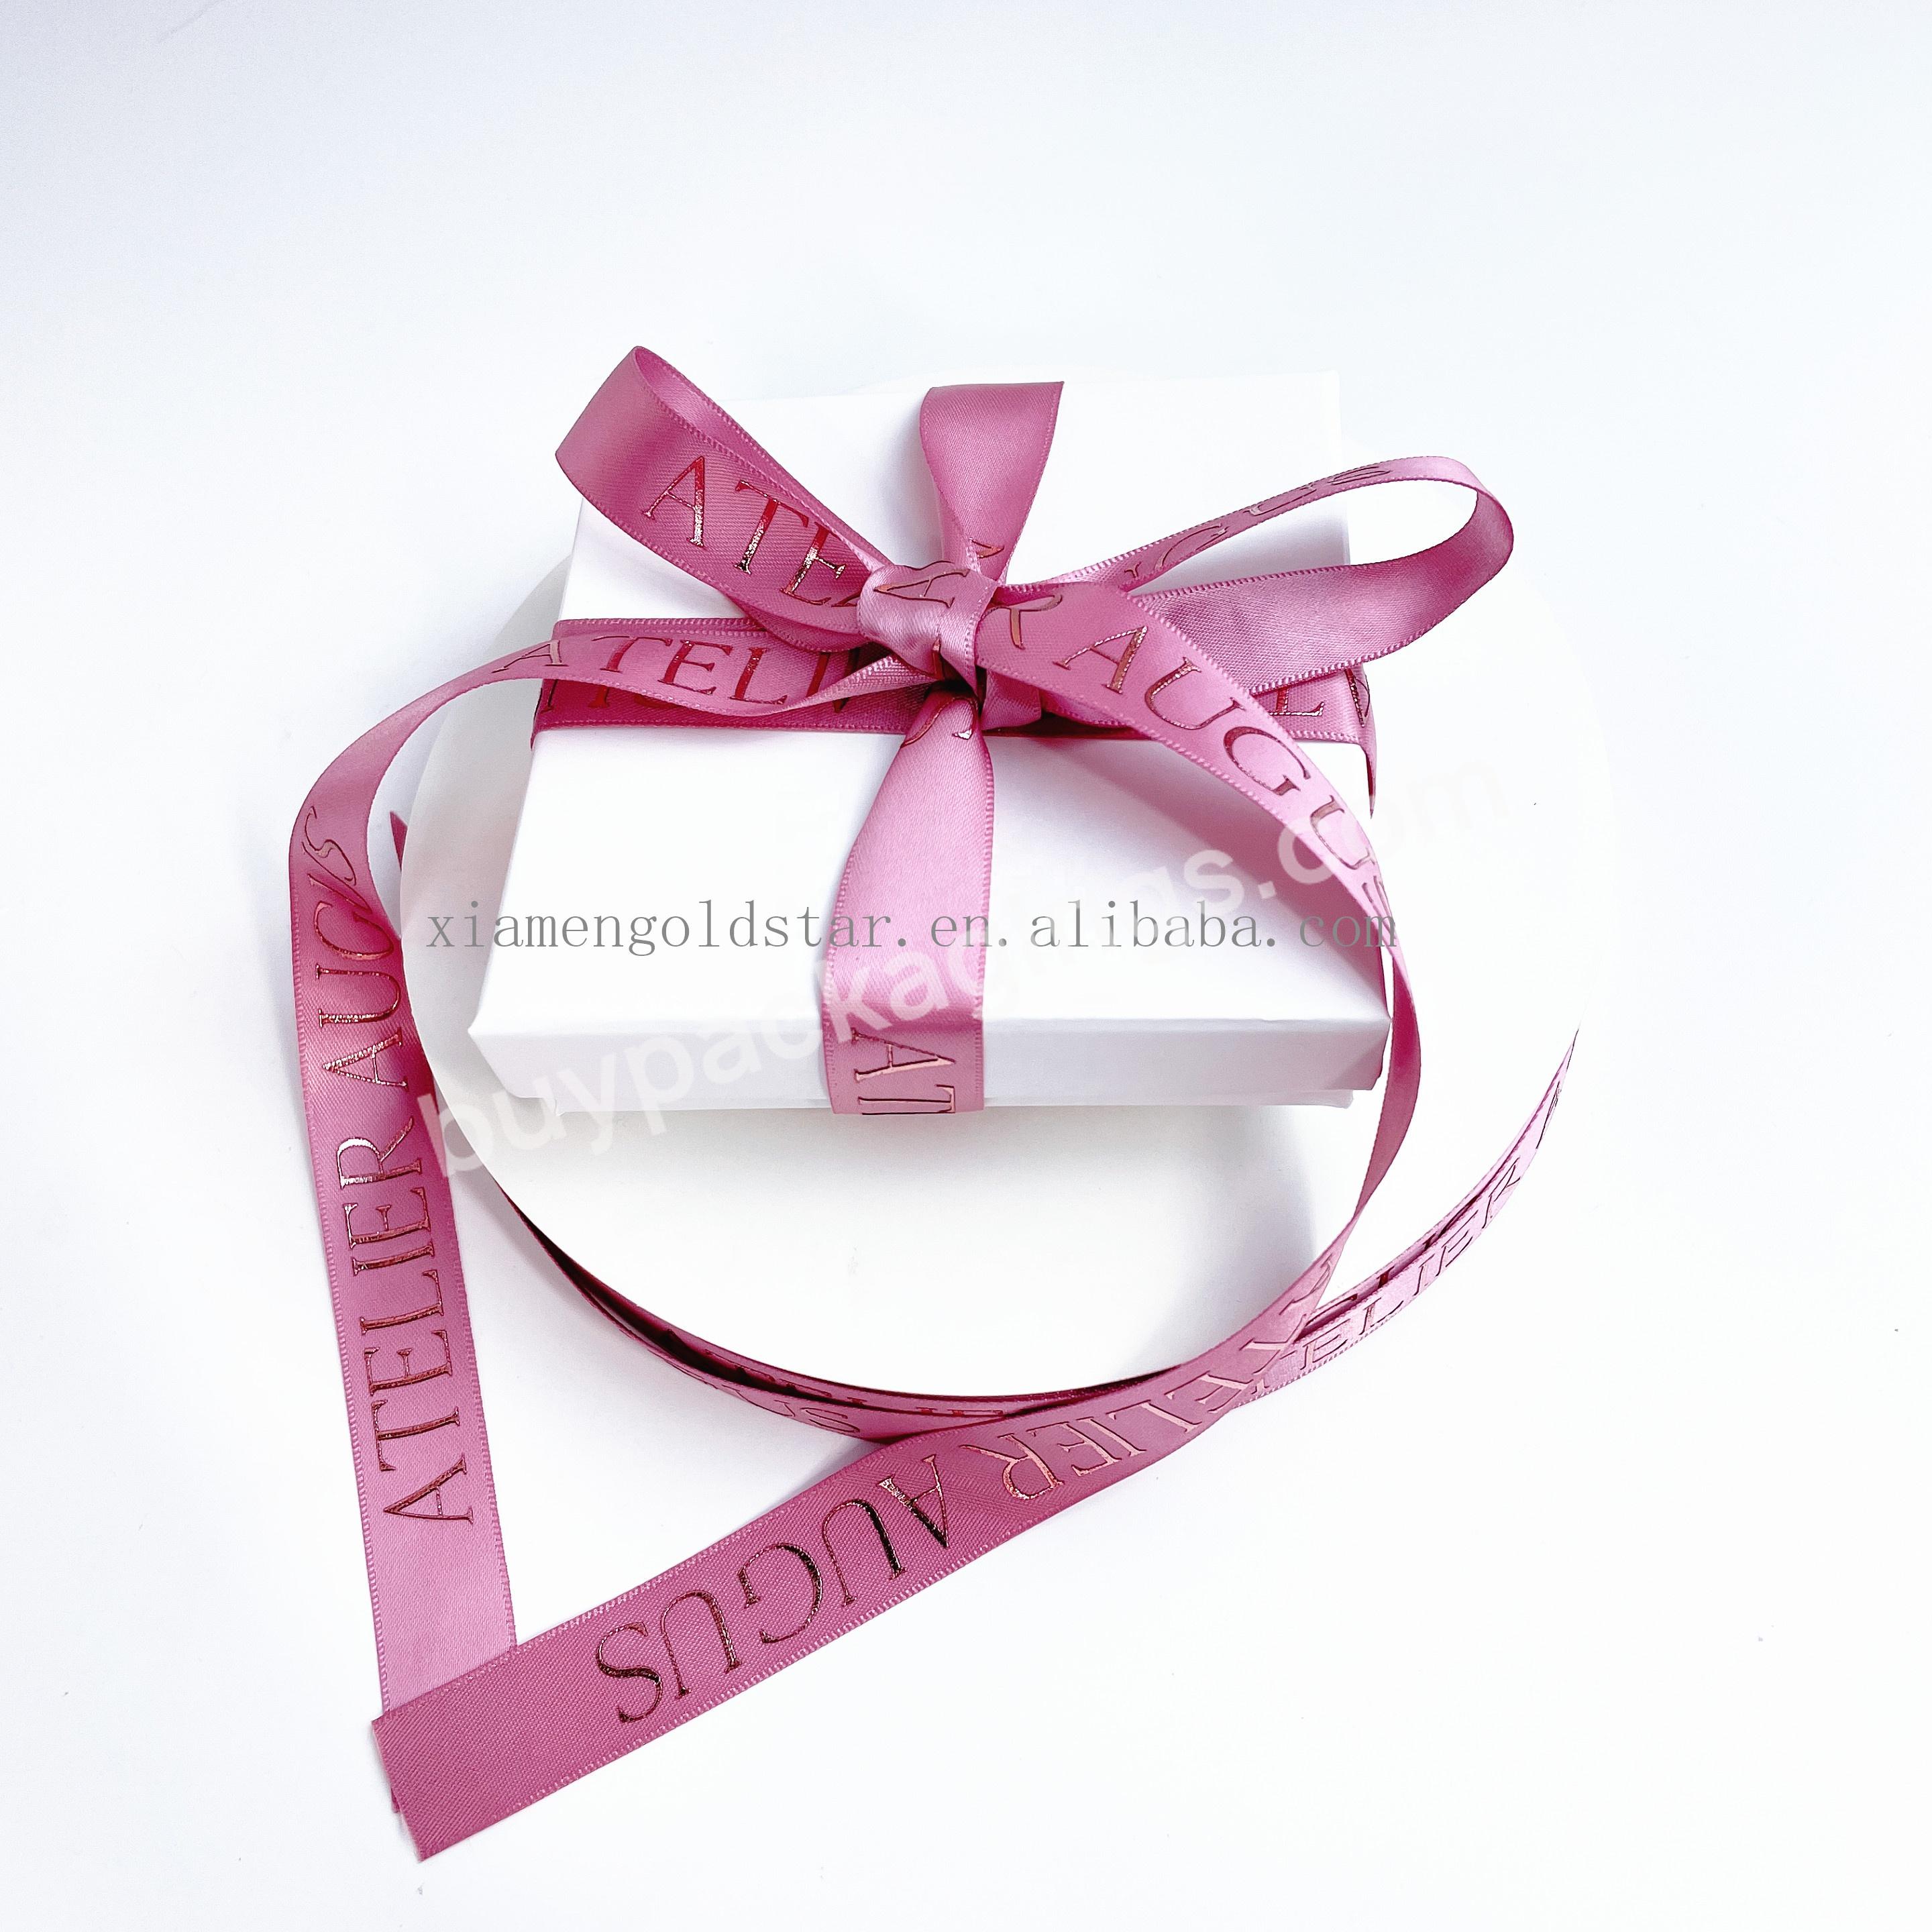 Customized 25mm Pink Polyester Decorative Satin Gift Ribbon Double Faced Smooth Satin Ribbon - Buy Satin Ribbon,25mm Pink Polyester Decorative Satin Gift Ribbon,Double Faced Smooth Satin Ribbon.